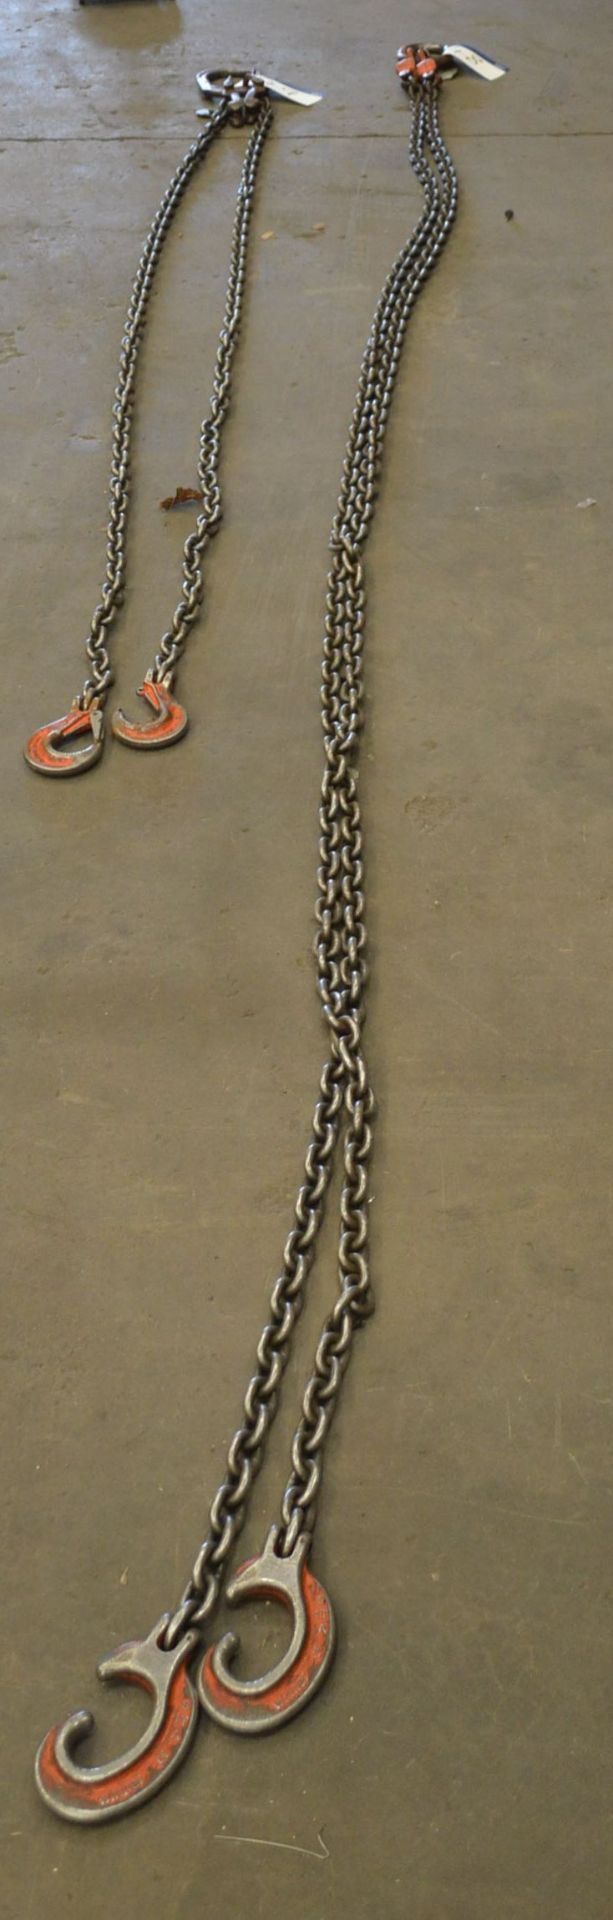 Winner Two Leg Chain Sling, approx. 4.3m long, with tensioners